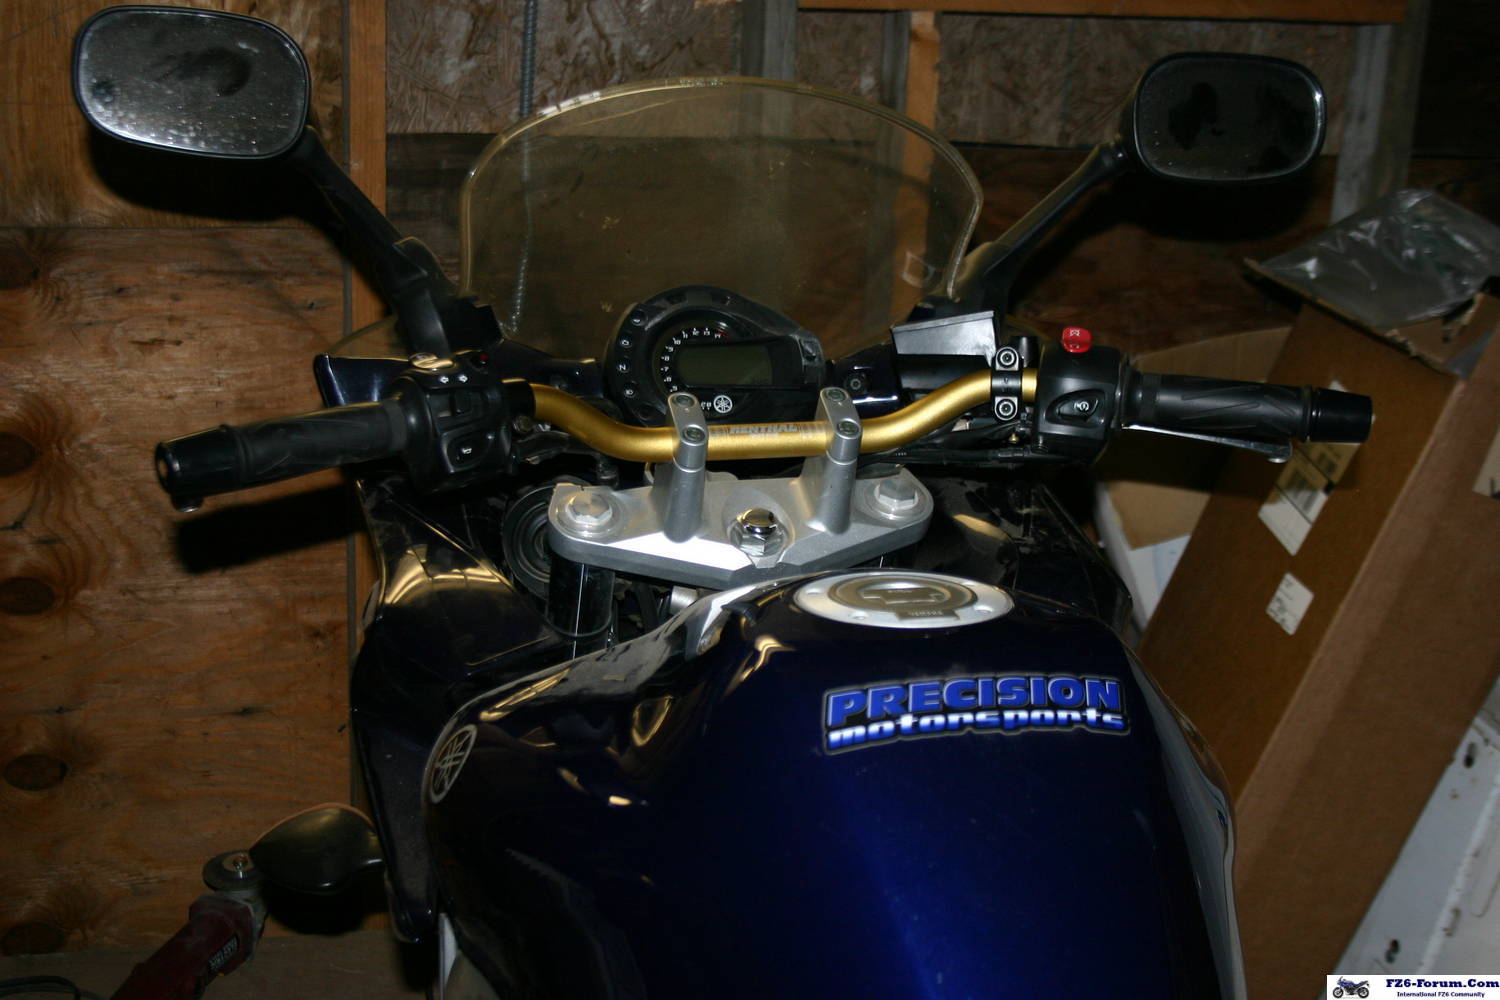 Renthal bars shortened 2 inches and tapped for Yamaha bar ends